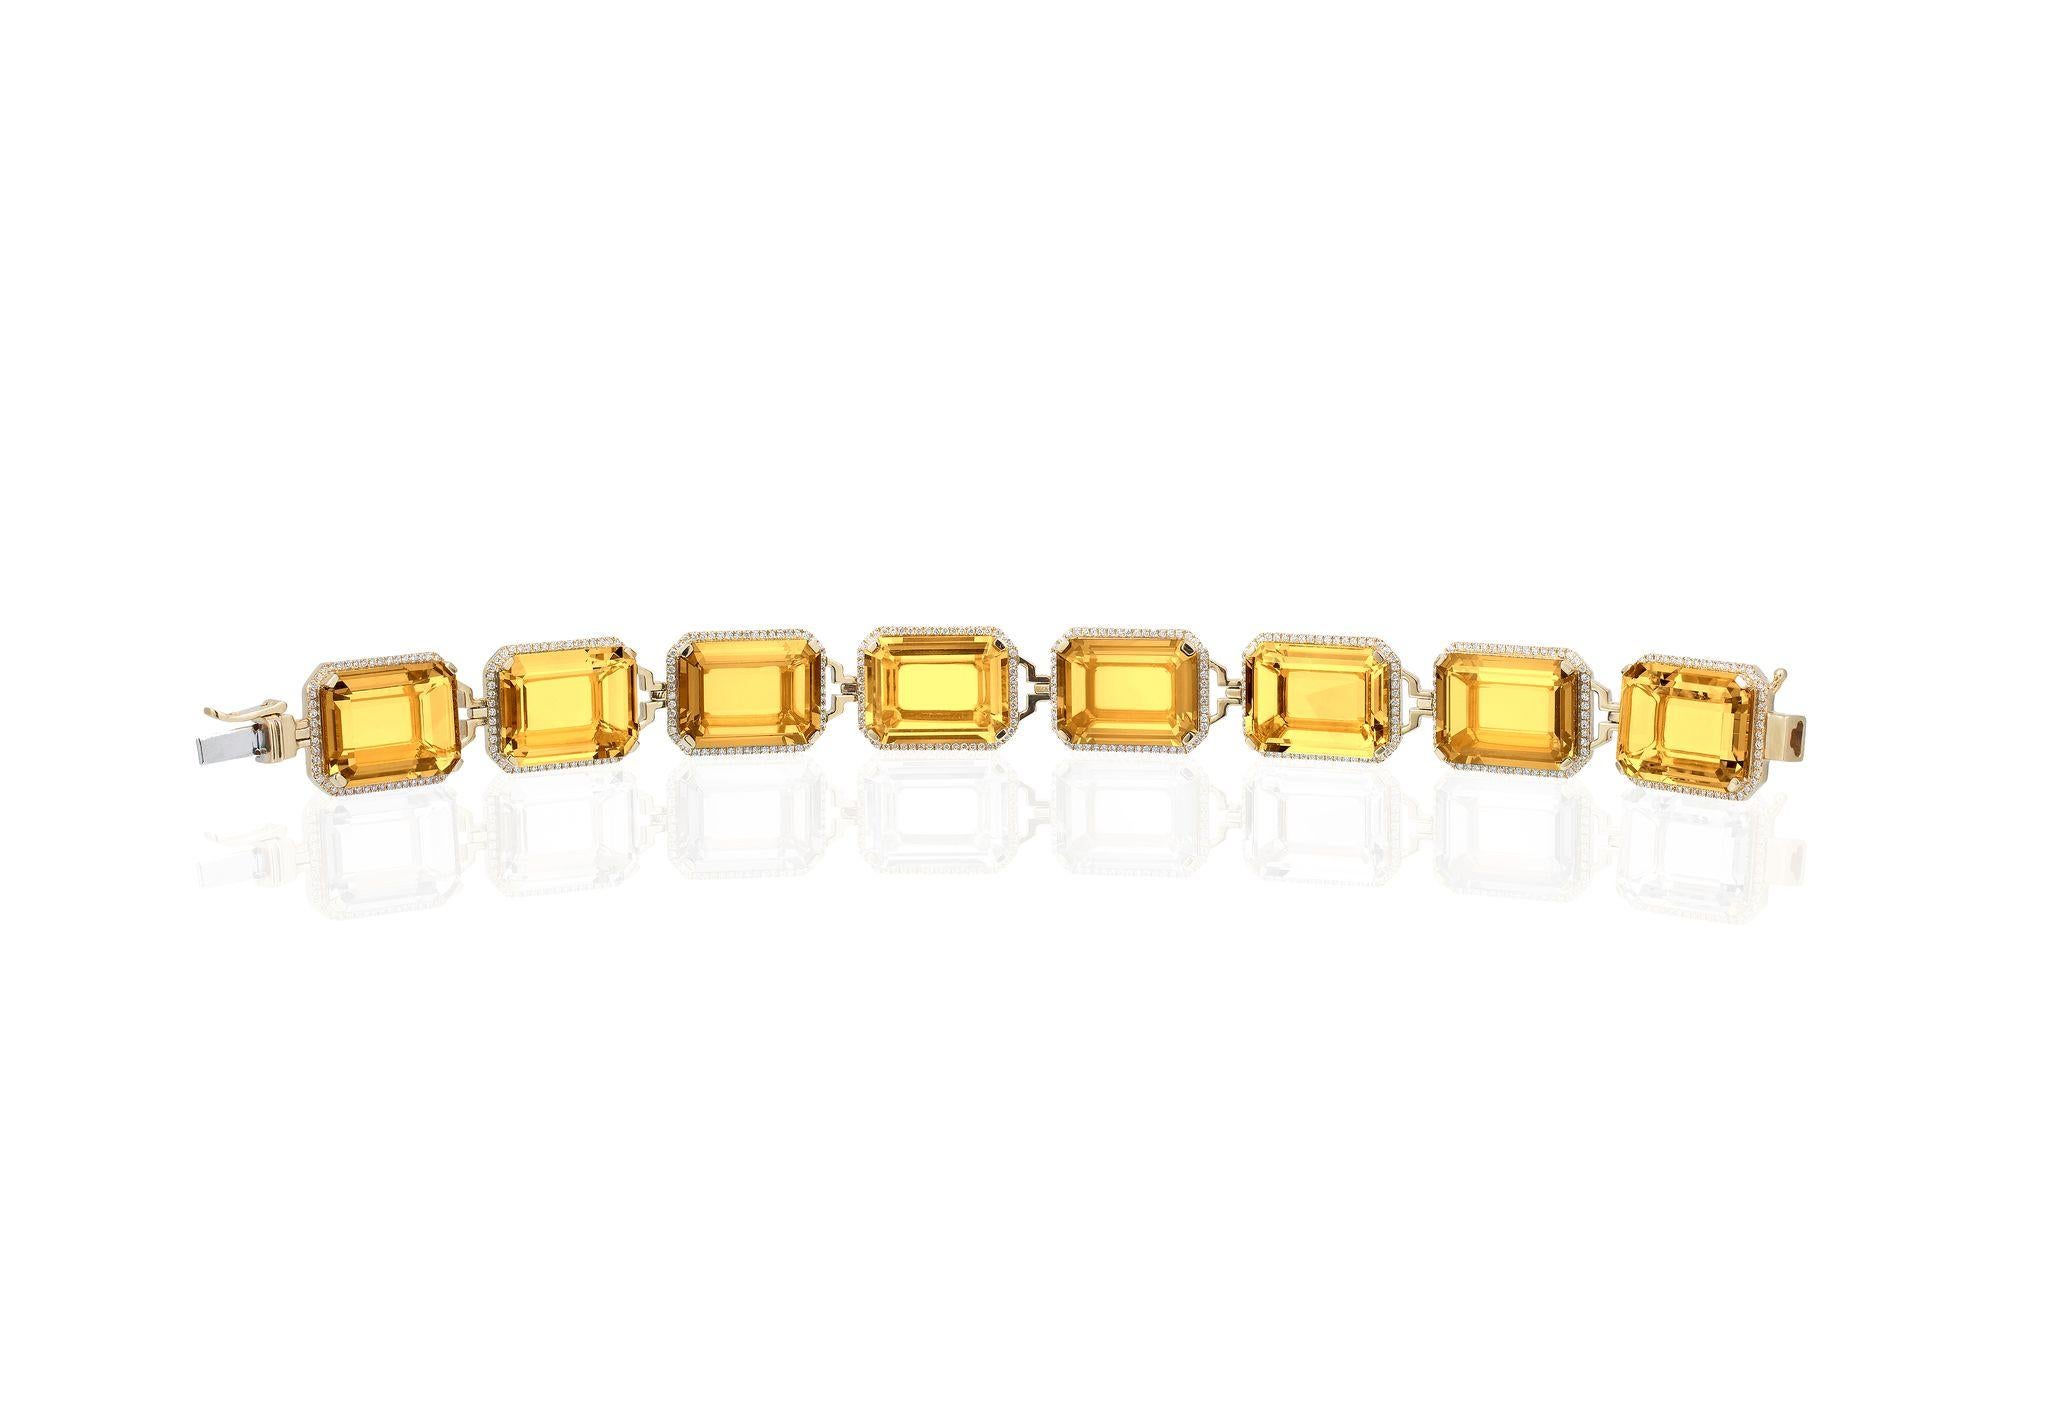 This Citrine Emerald Cut Bracelet with Diamonds in 18K Yellow Gold is a stunning piece from the ‘Gossip’ Collection. The bracelet features beautifully cut citrine gemstones, set in 18K yellow gold and accented with sparkling diamonds. The emerald